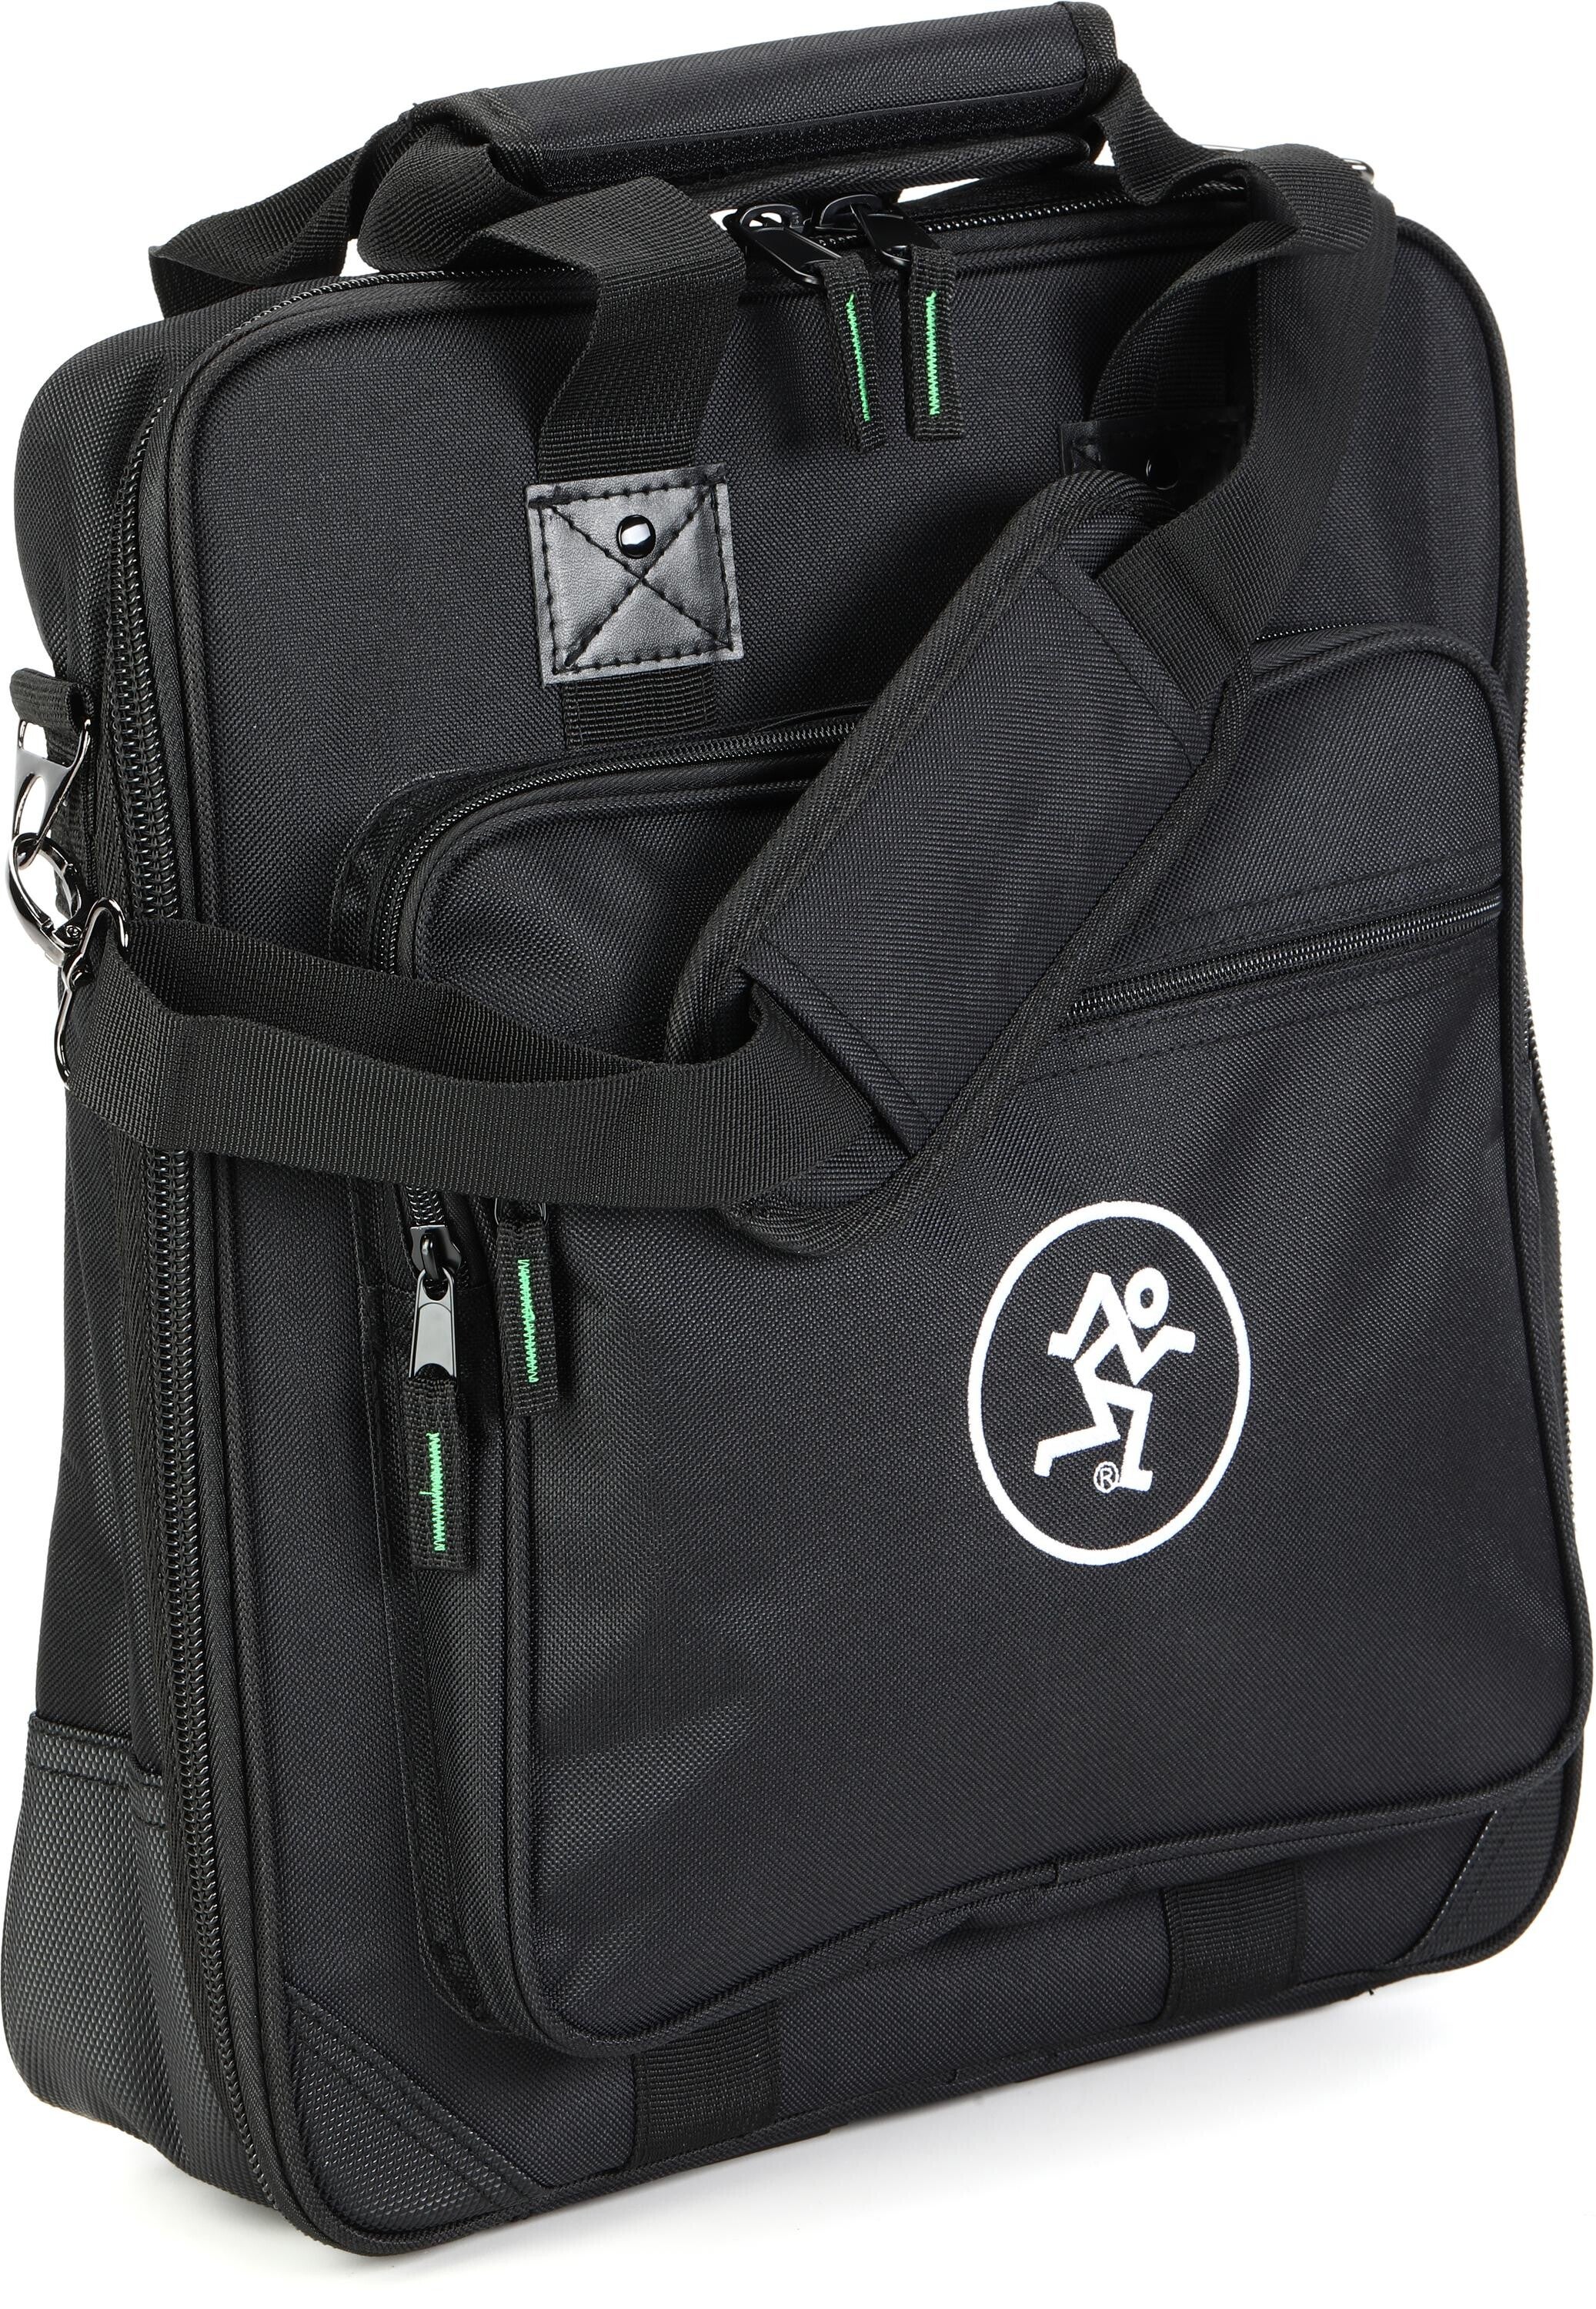 Mackie ProFX12v3 Mixer Bag | Sweetwater